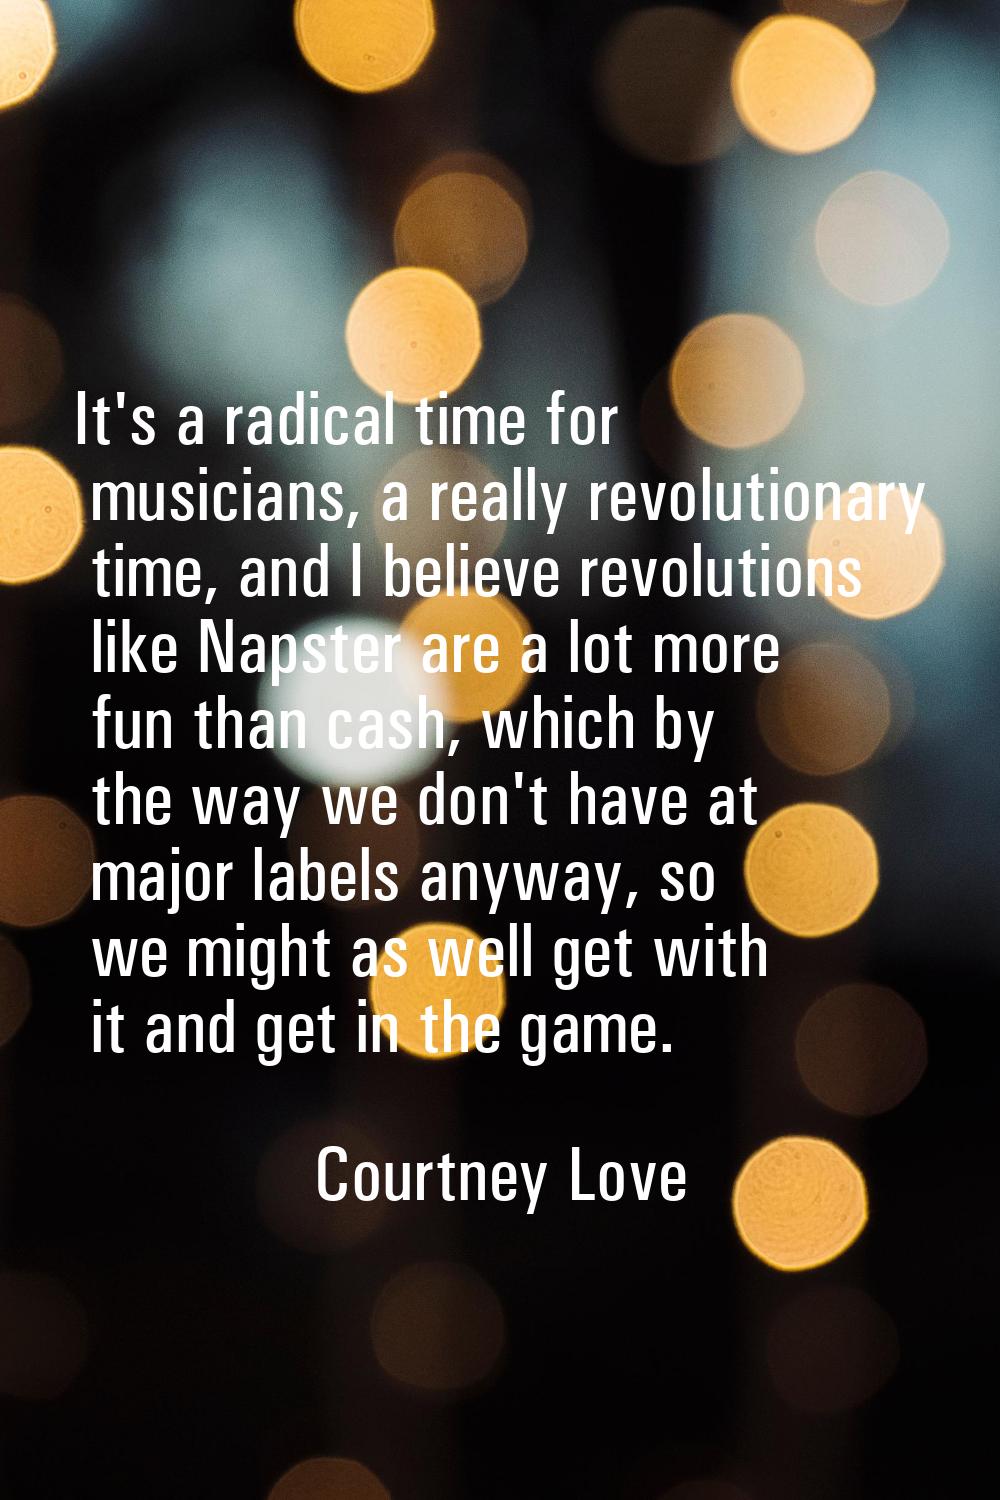 It's a radical time for musicians, a really revolutionary time, and I believe revolutions like Naps